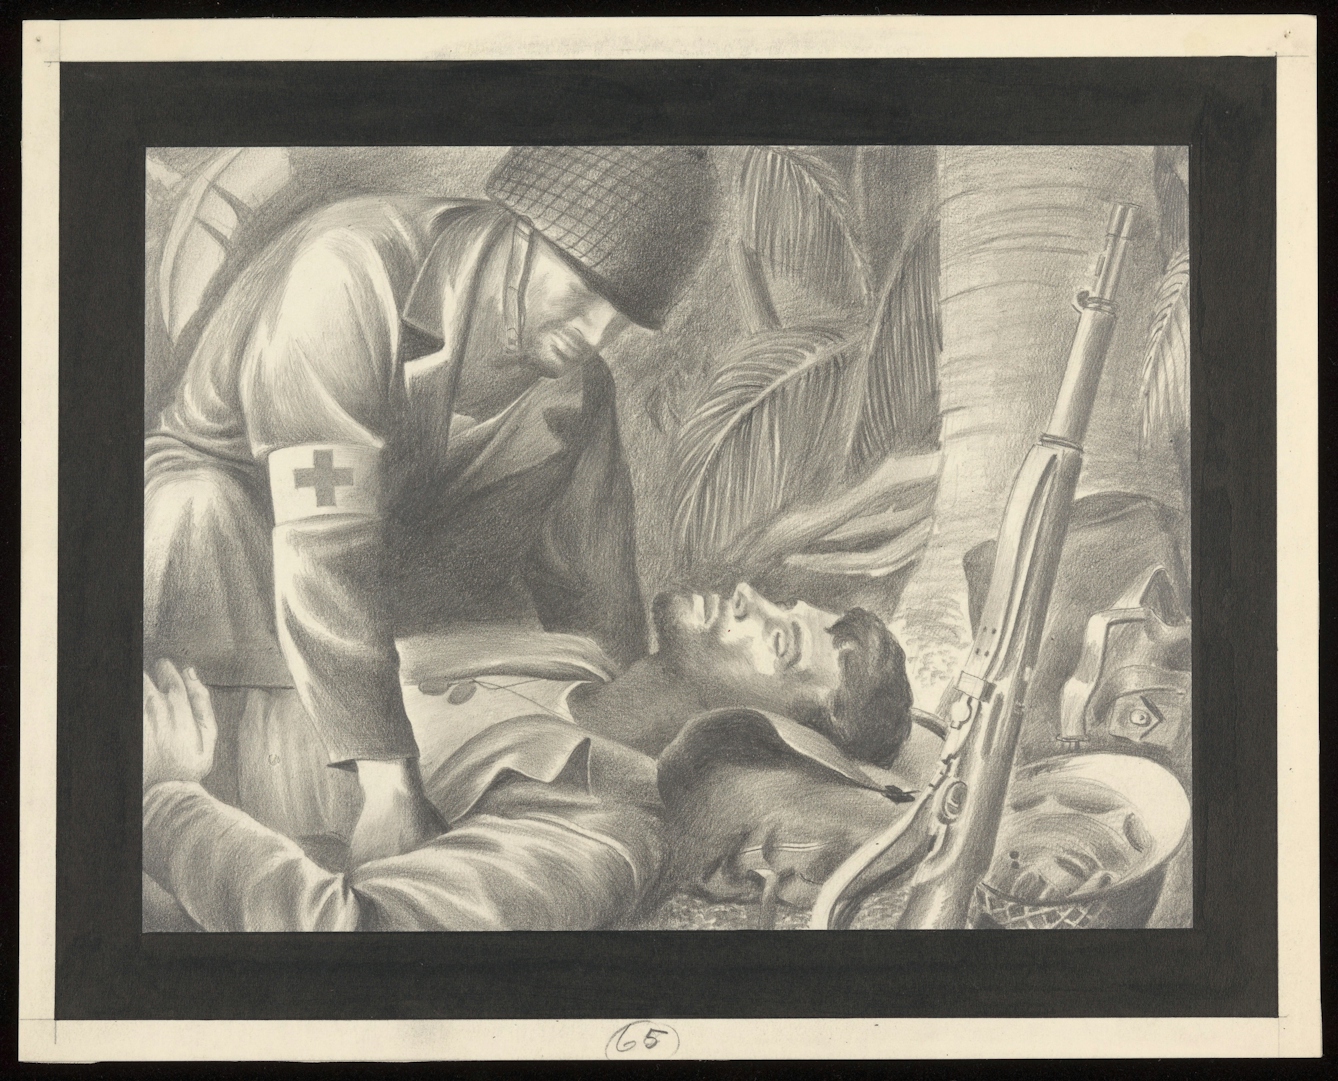 Black and white pencil drawing of two soldiers. One is lying down on a makeshift headrest, wounded with his eyes closed and his helmet removed. Another solder is leaning over him, and he has a red cross arm band on his uniform. A machine gun is propped up against a tree next to the two soldiers.  